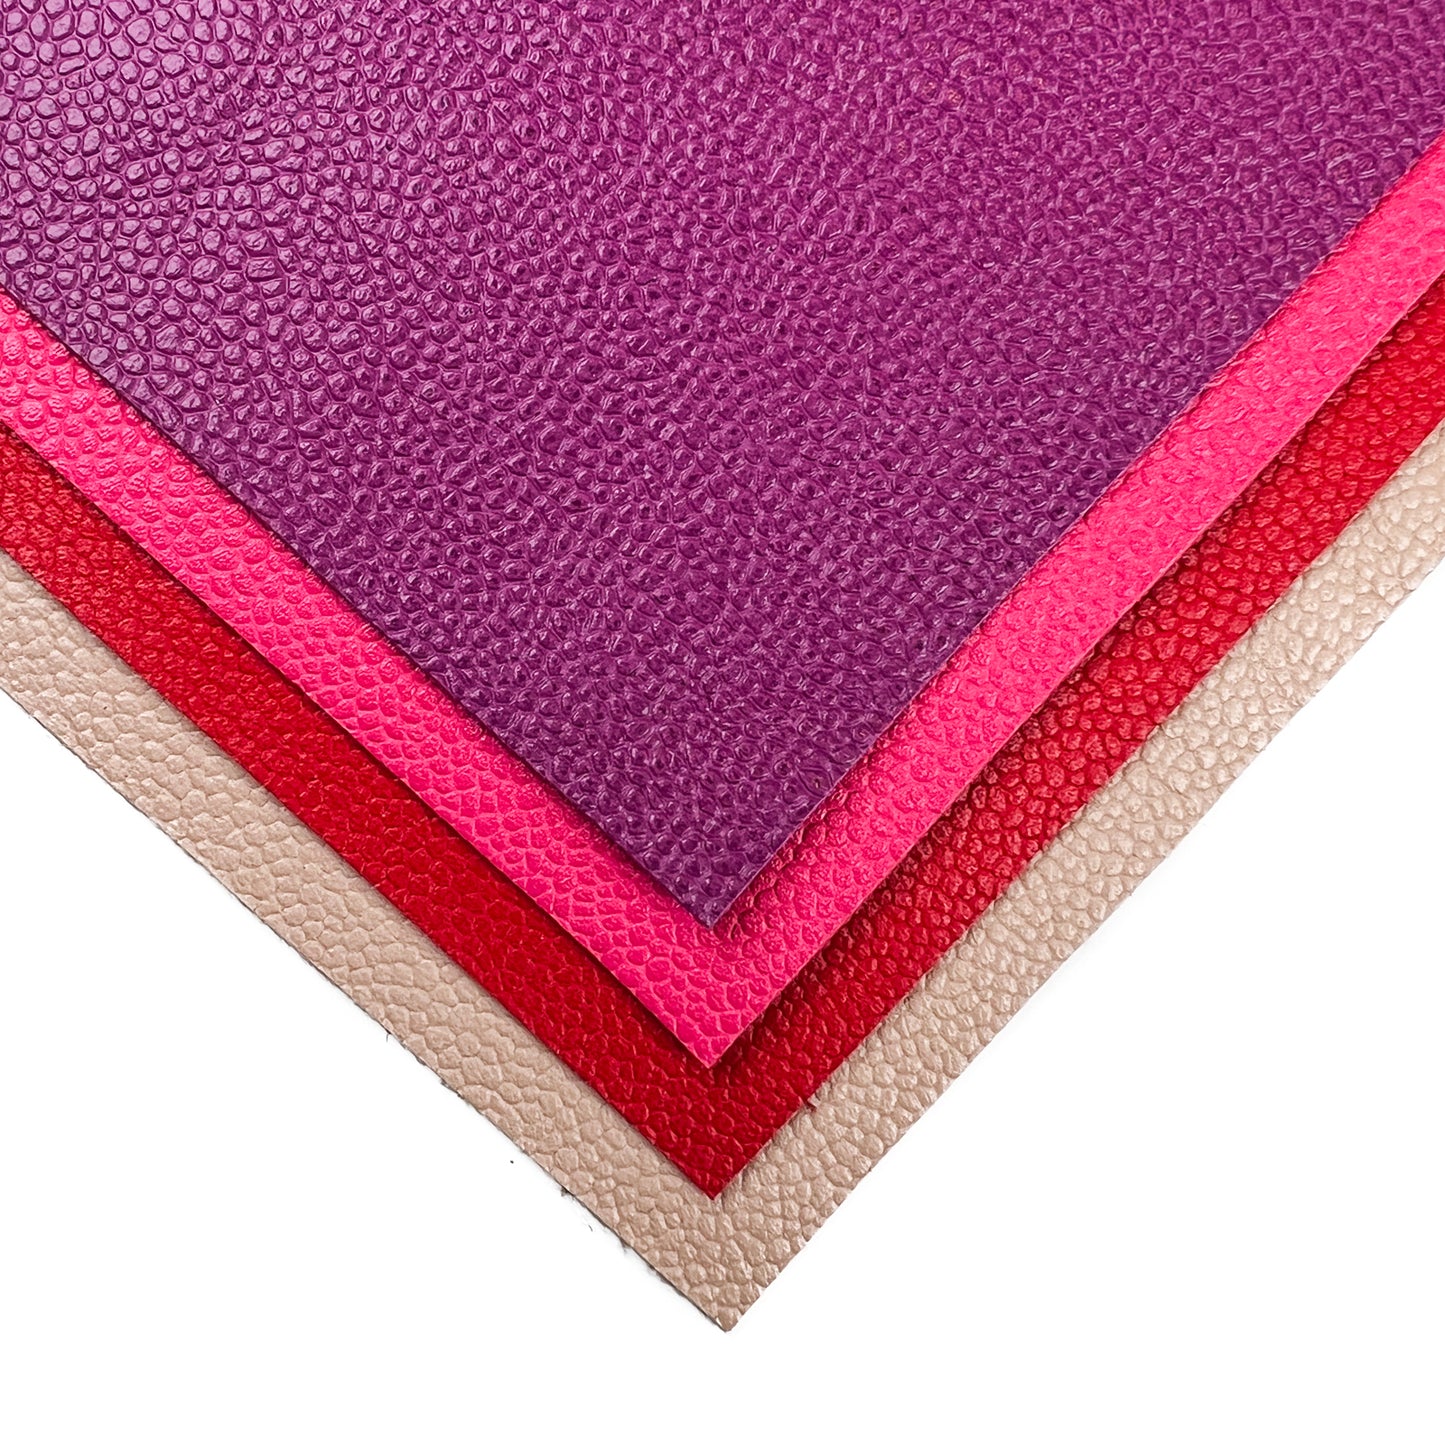 Bright Pebbled Sheets 5x5 Inches 4 Genuine Leather